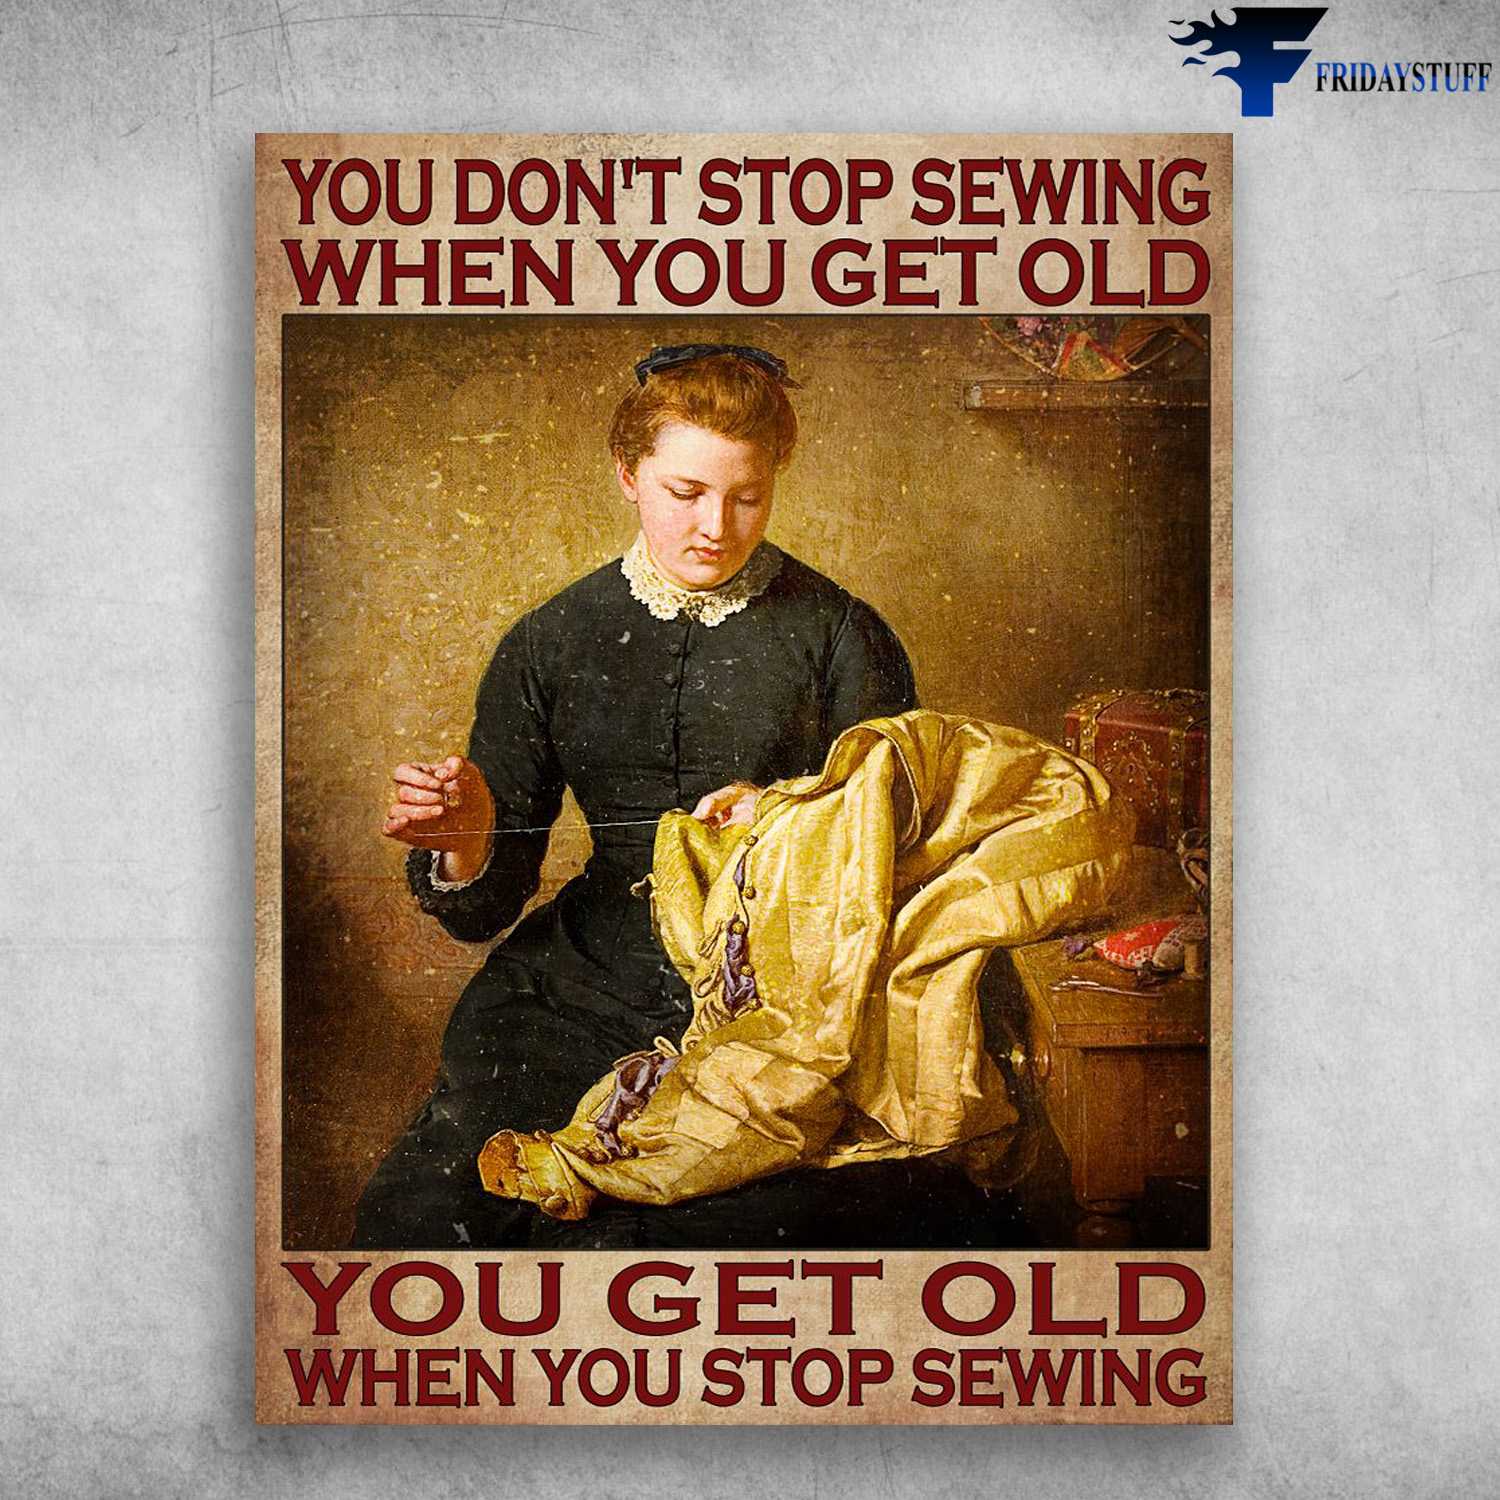 Sewing Girl, Sewing Poster - You Don't Stop Sewing When You Get Old, You Get Old When You Stop Sewing